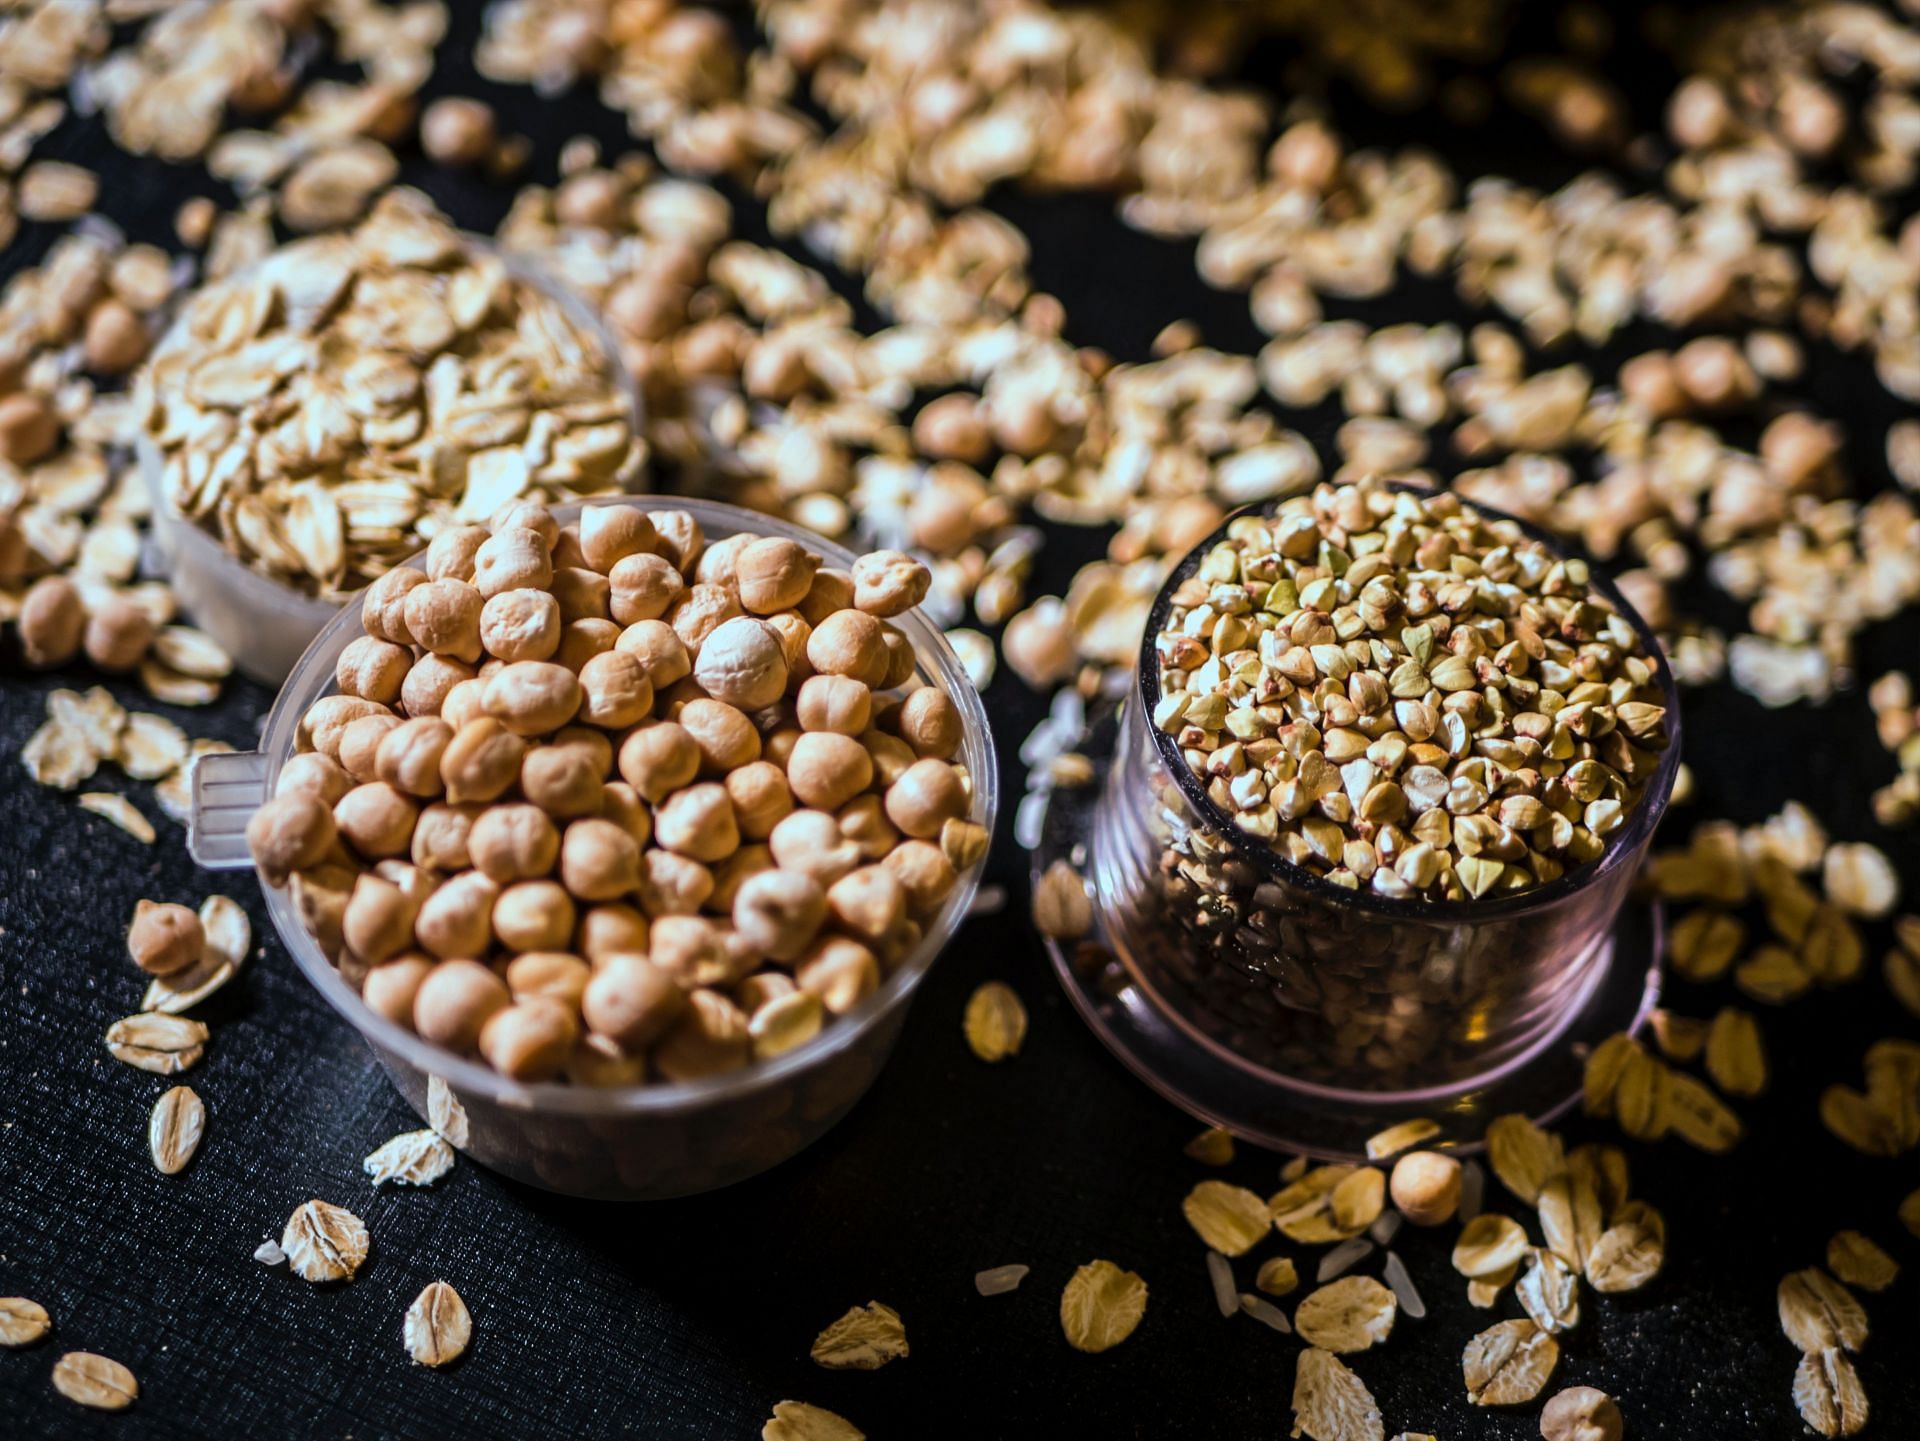 Foods to avoid with diverticulitis: Avoiding whole grains. (Image via Pexels / Mike)